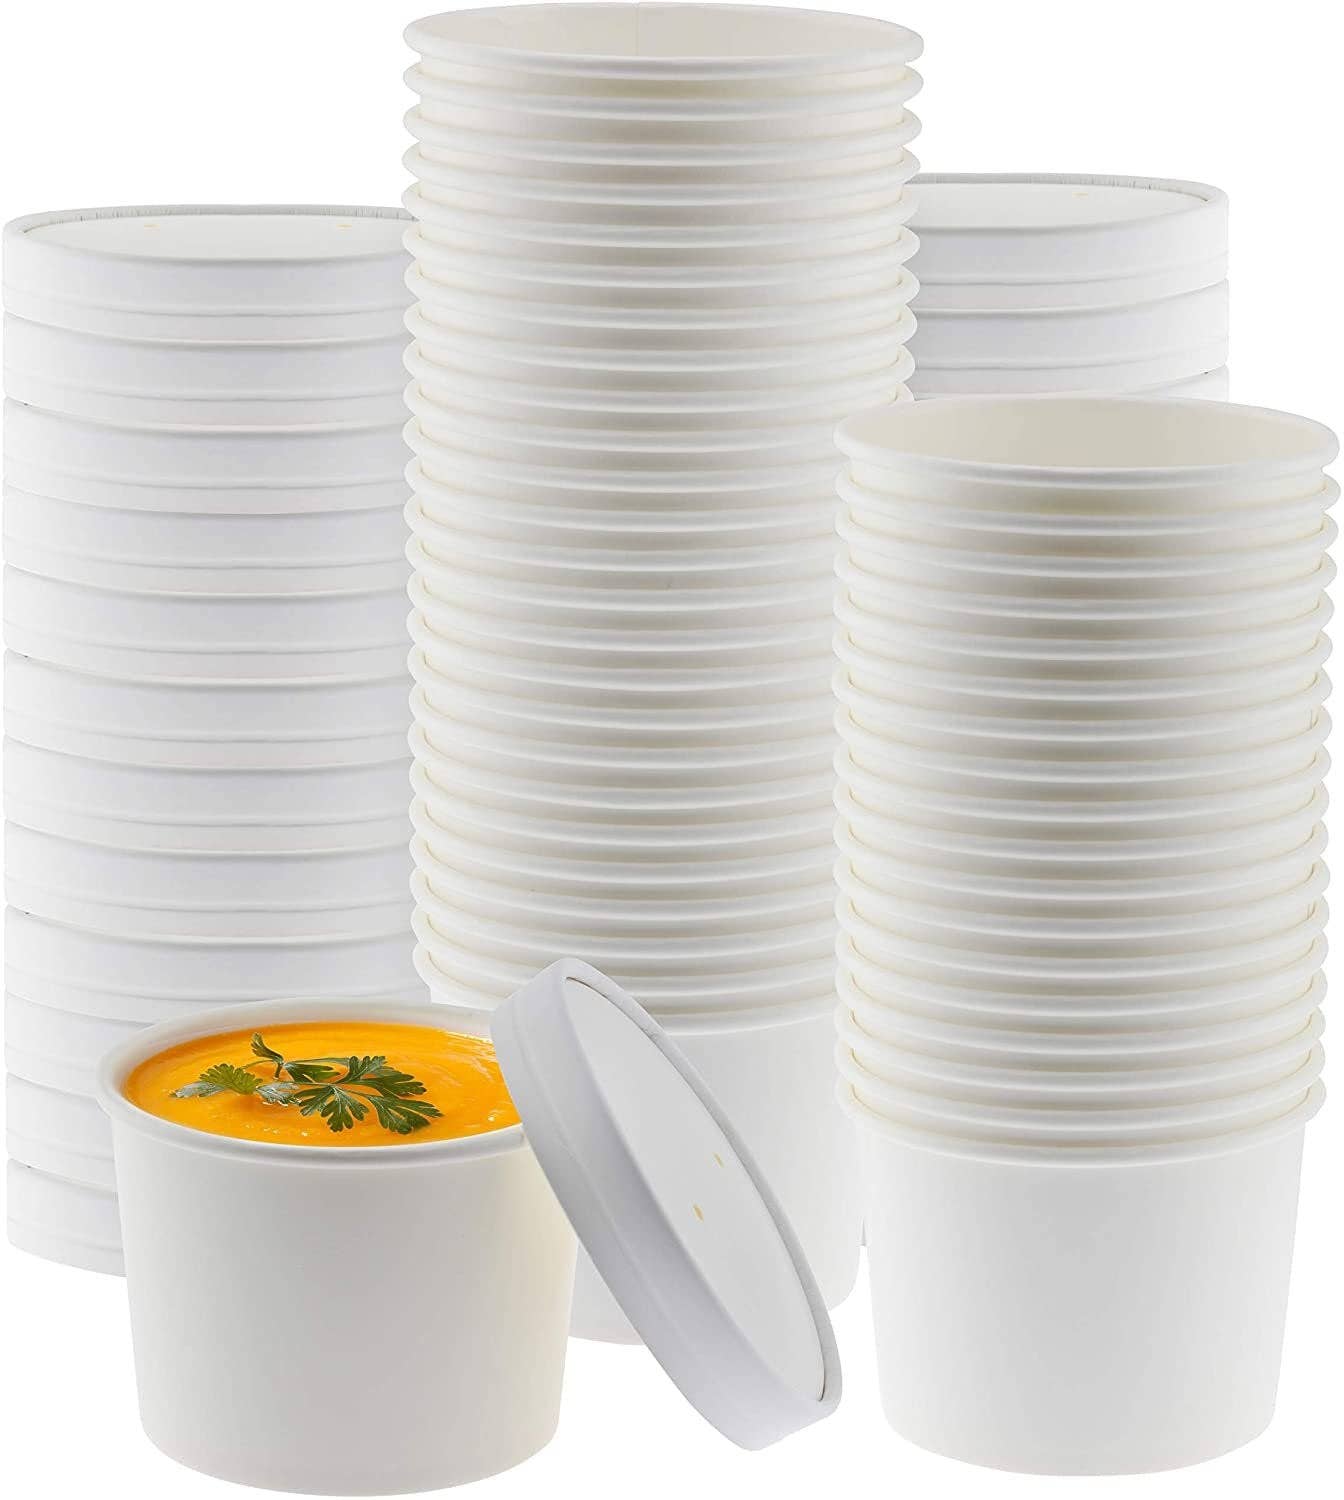 Purchase Wholesale disposable food containers. Free Returns & Net